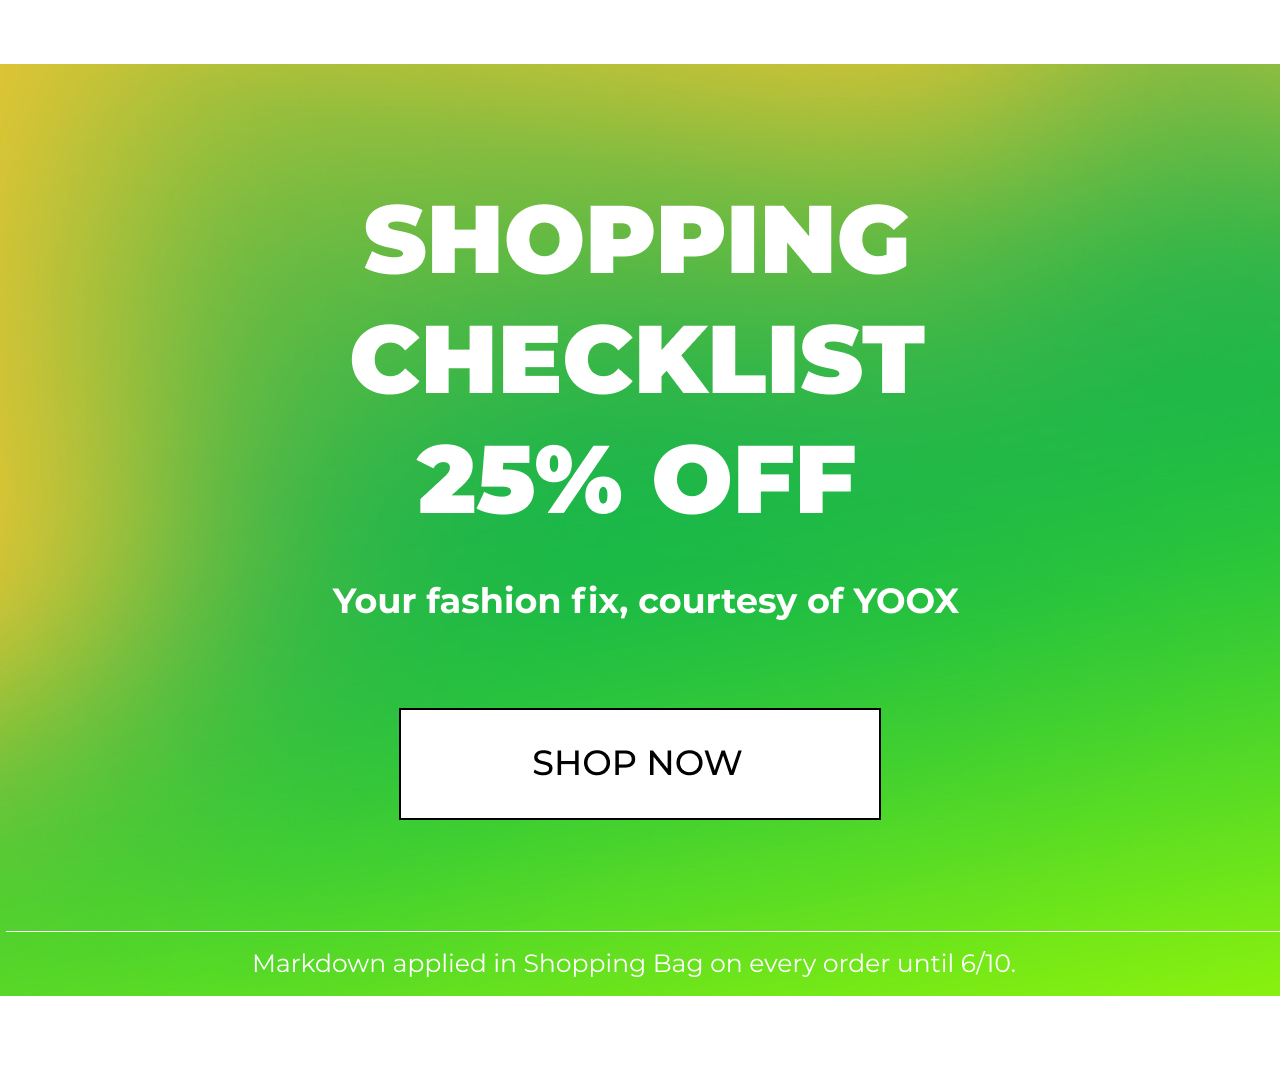 SHOPPING CHECKLIST 25% OFF Your fashion fix, courtesy of YOOX SHOP NOW Markdown applied in Shopping Bag on every order until 610. 